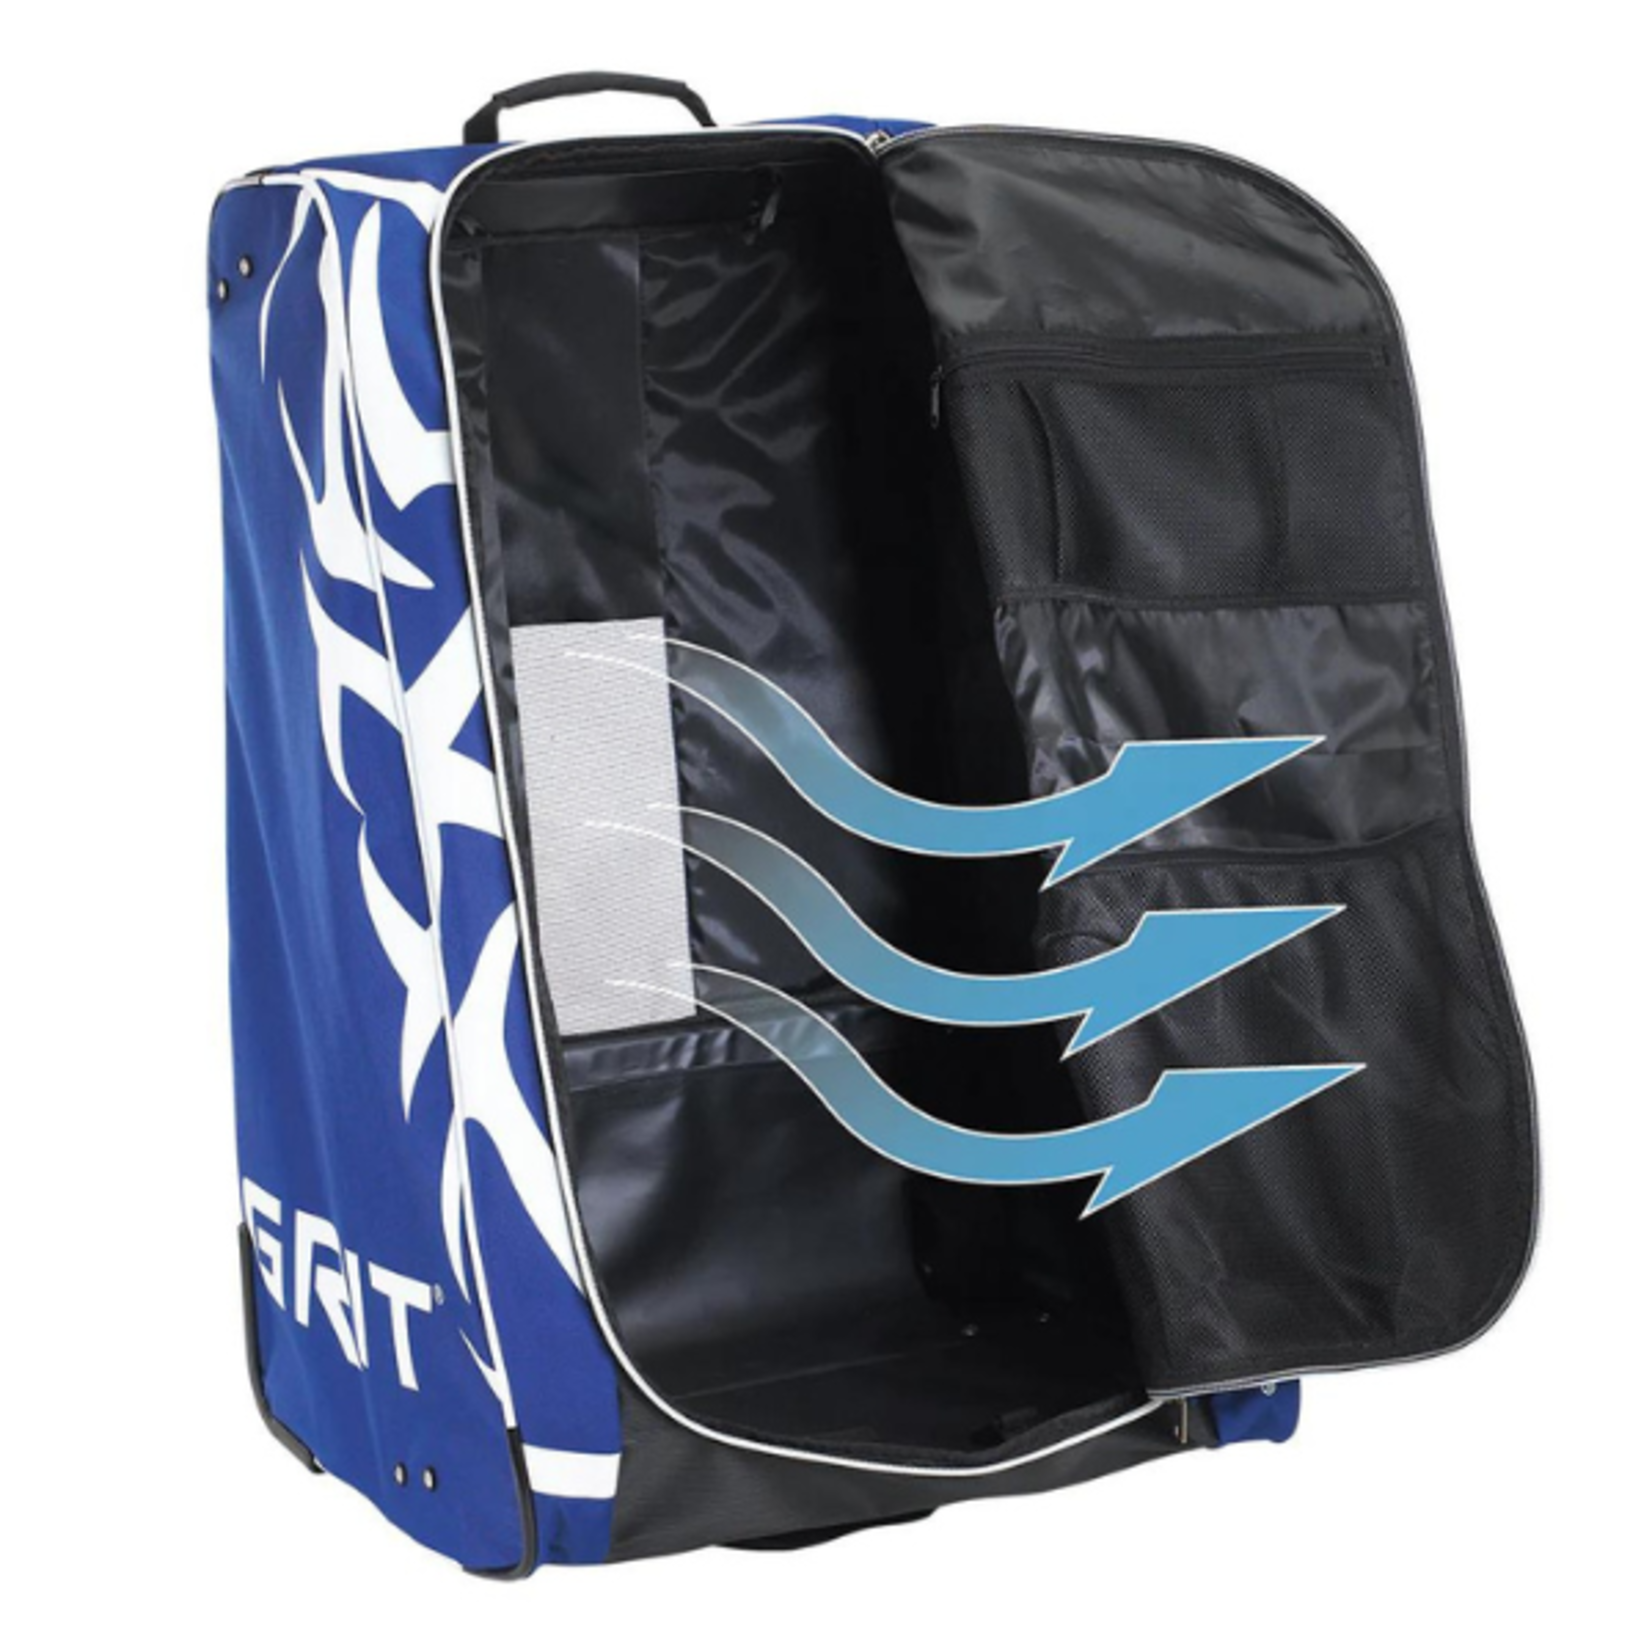 Grit Grit HYFX Hockey Tower Bag (YOUTH)